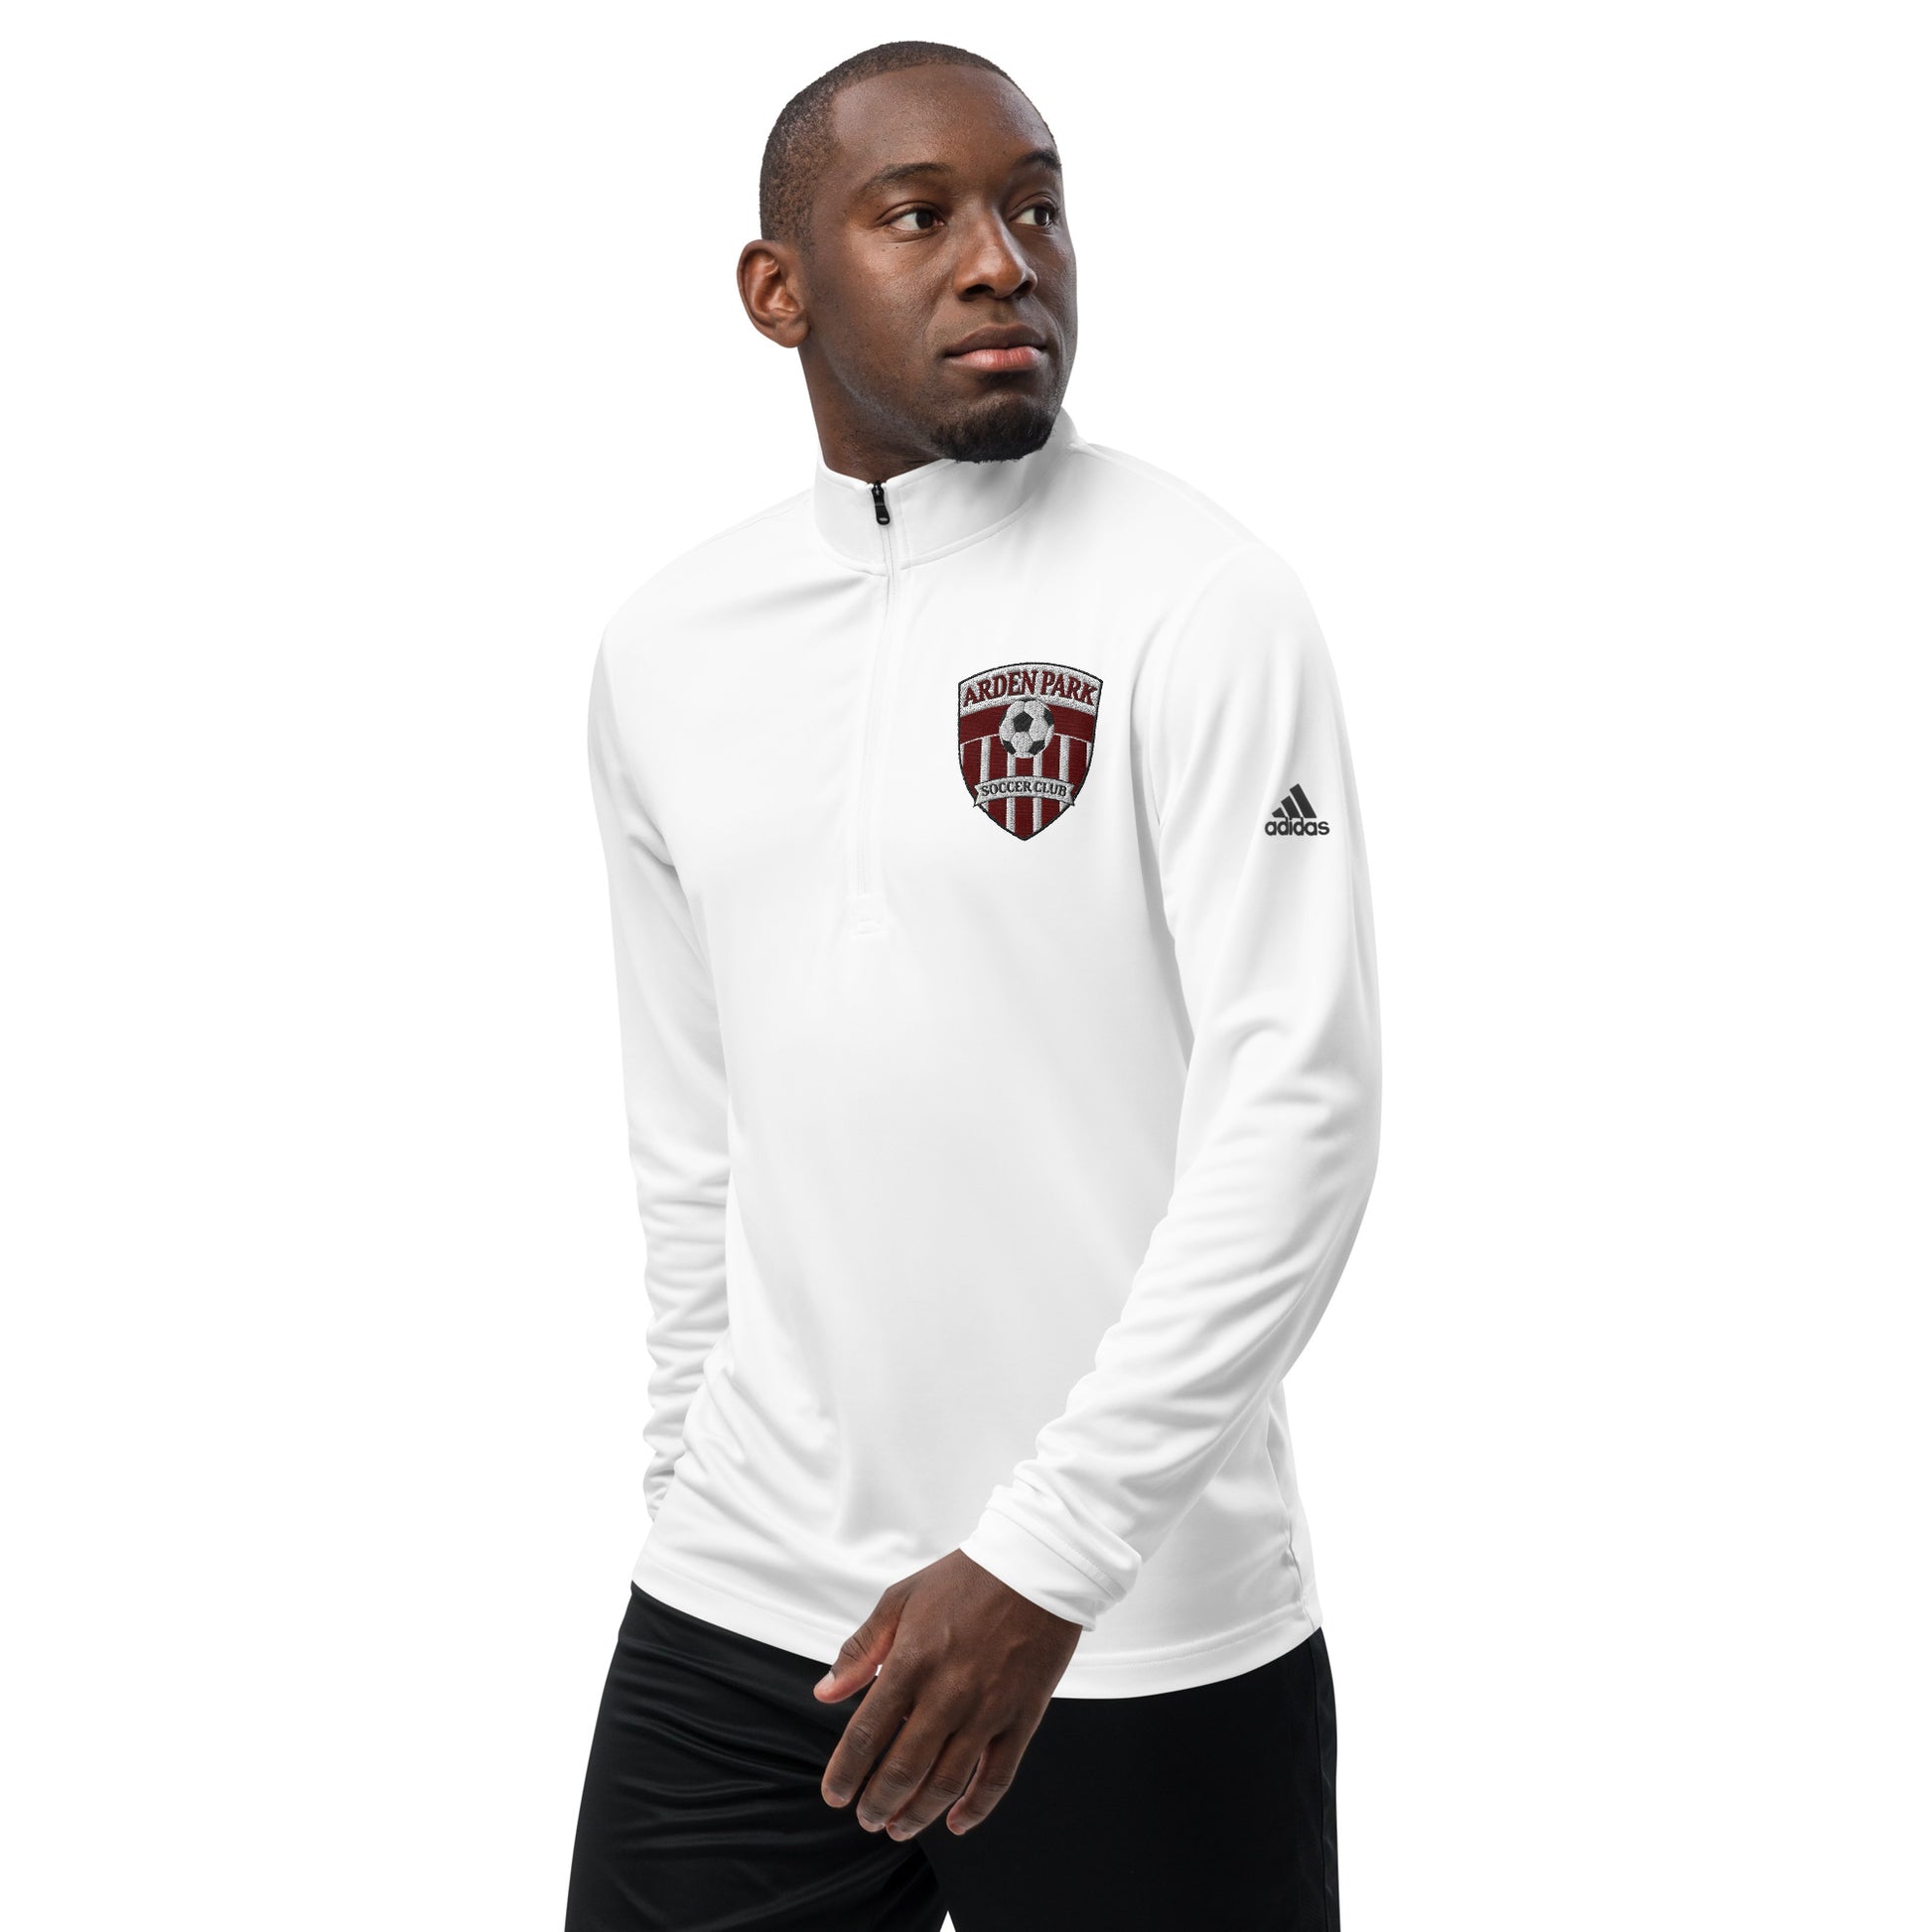 PF University of Louisville Rugby 3/4 Raglan Shirts White/Heather Charcoal / L